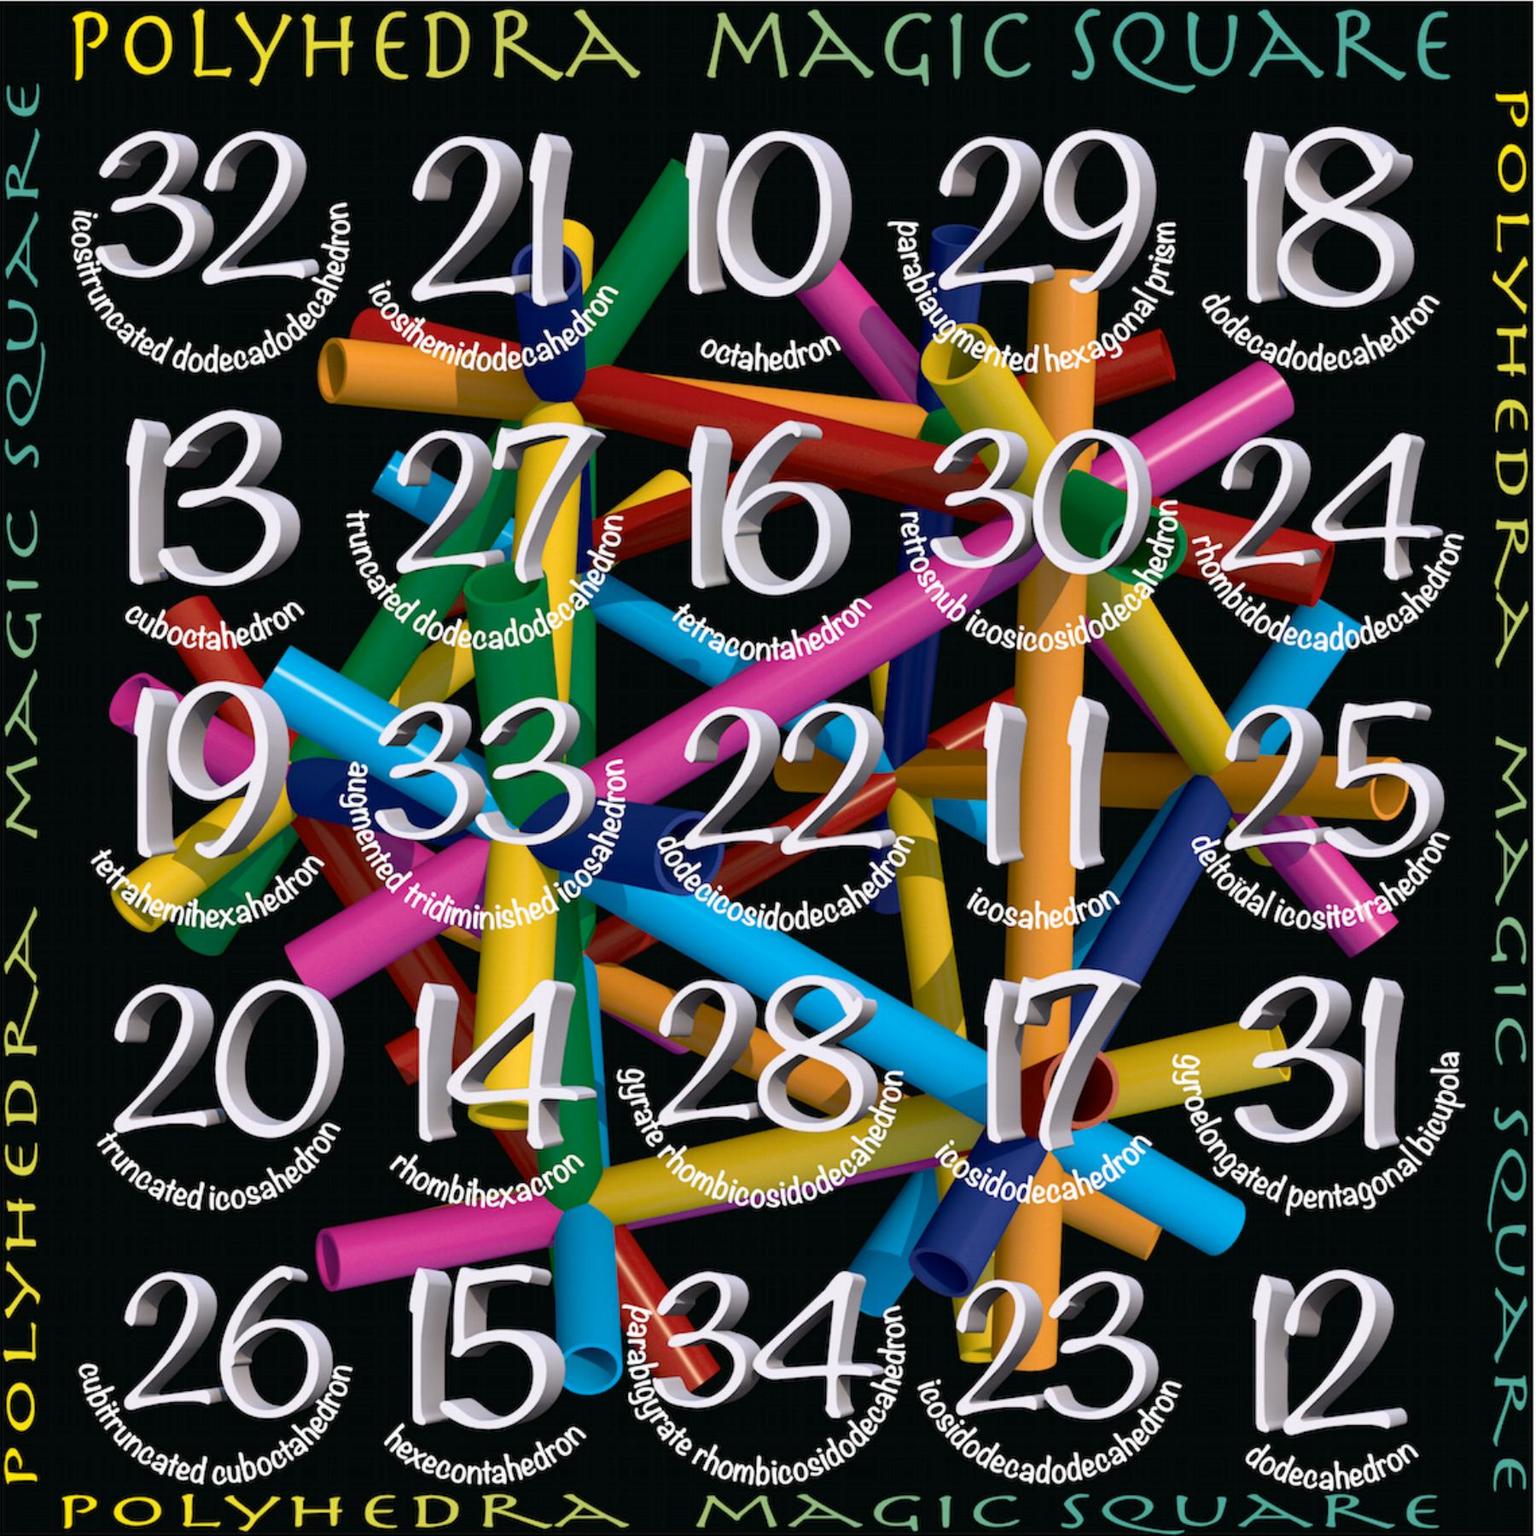 Image for entry 'Polyhedra Magic Square'